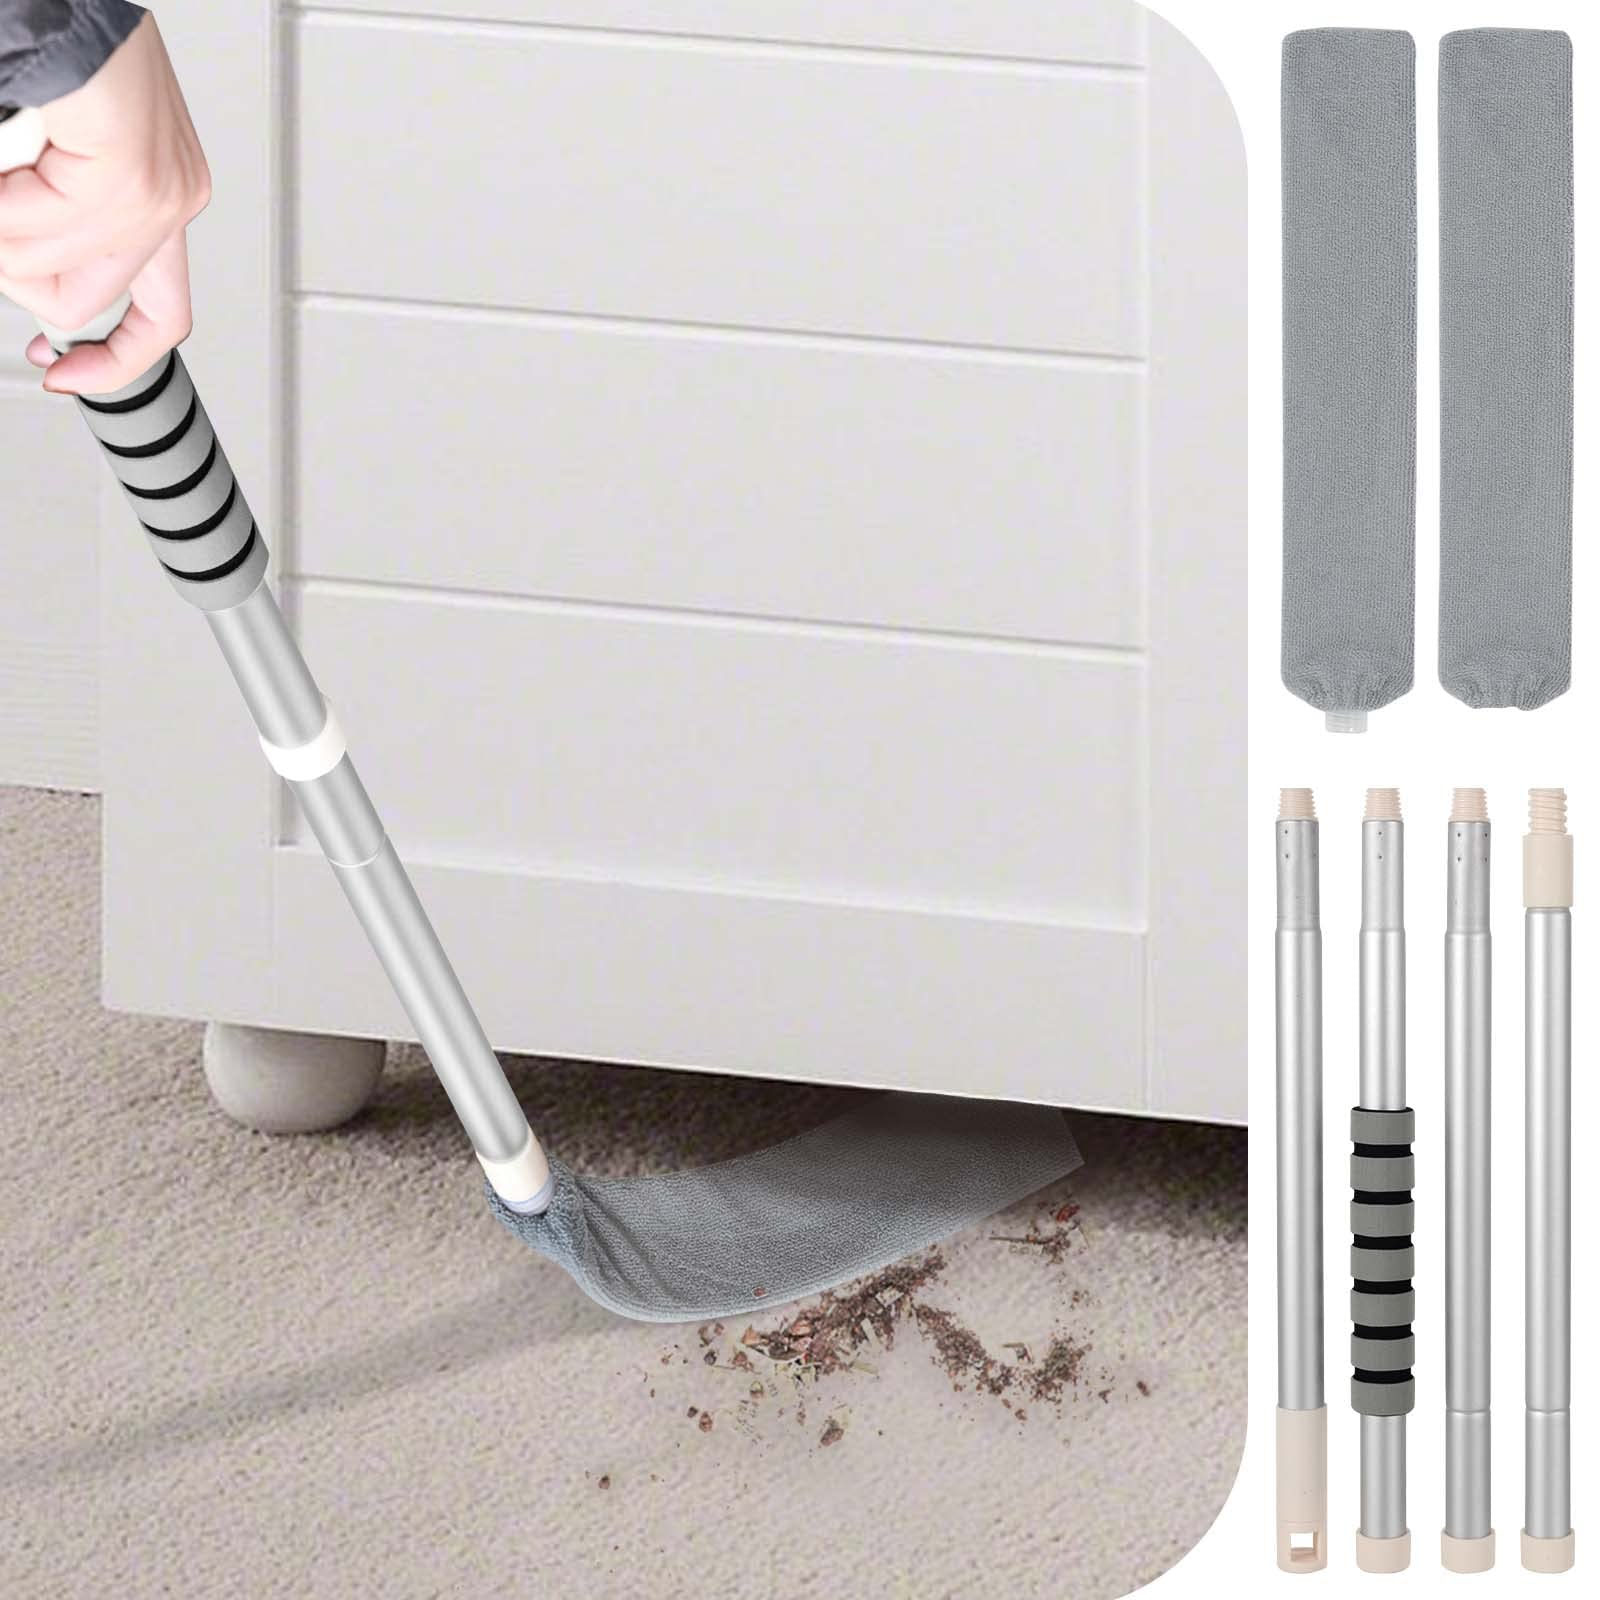 4Pcs Retractable Gap Dust Cleaner Flexible Up to 55in Gap Dust Brush Under  Appliance Cleaning Tool Feather Duster with Extension Pole Removable